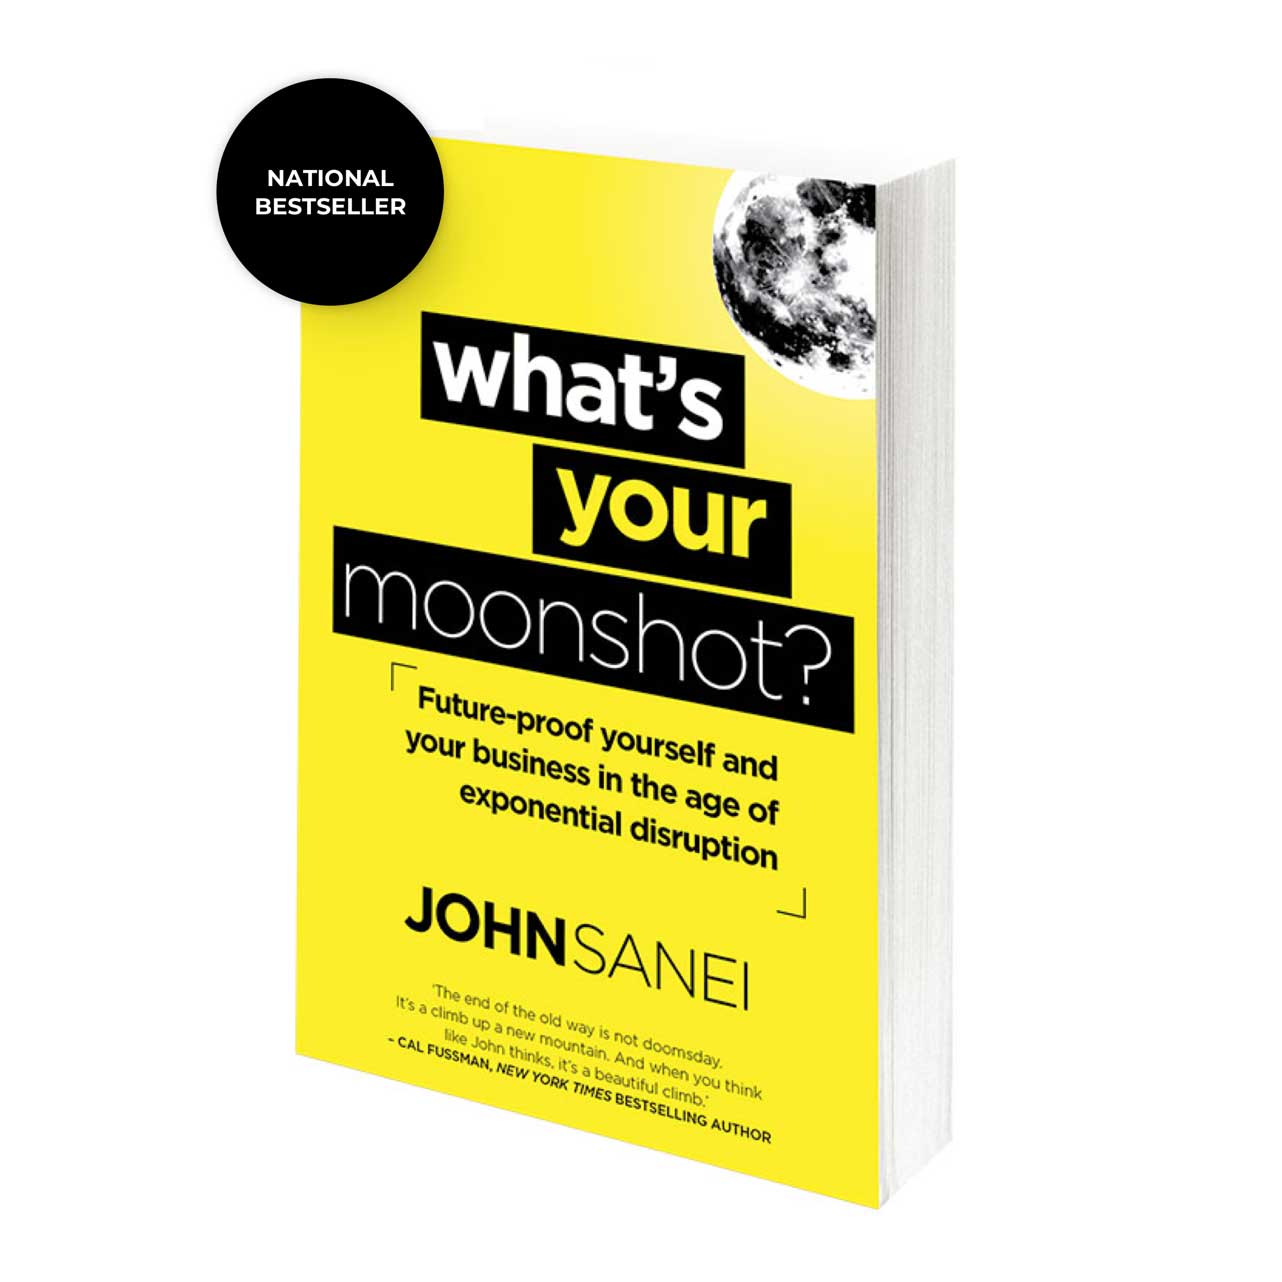 Whats-your-moonshot